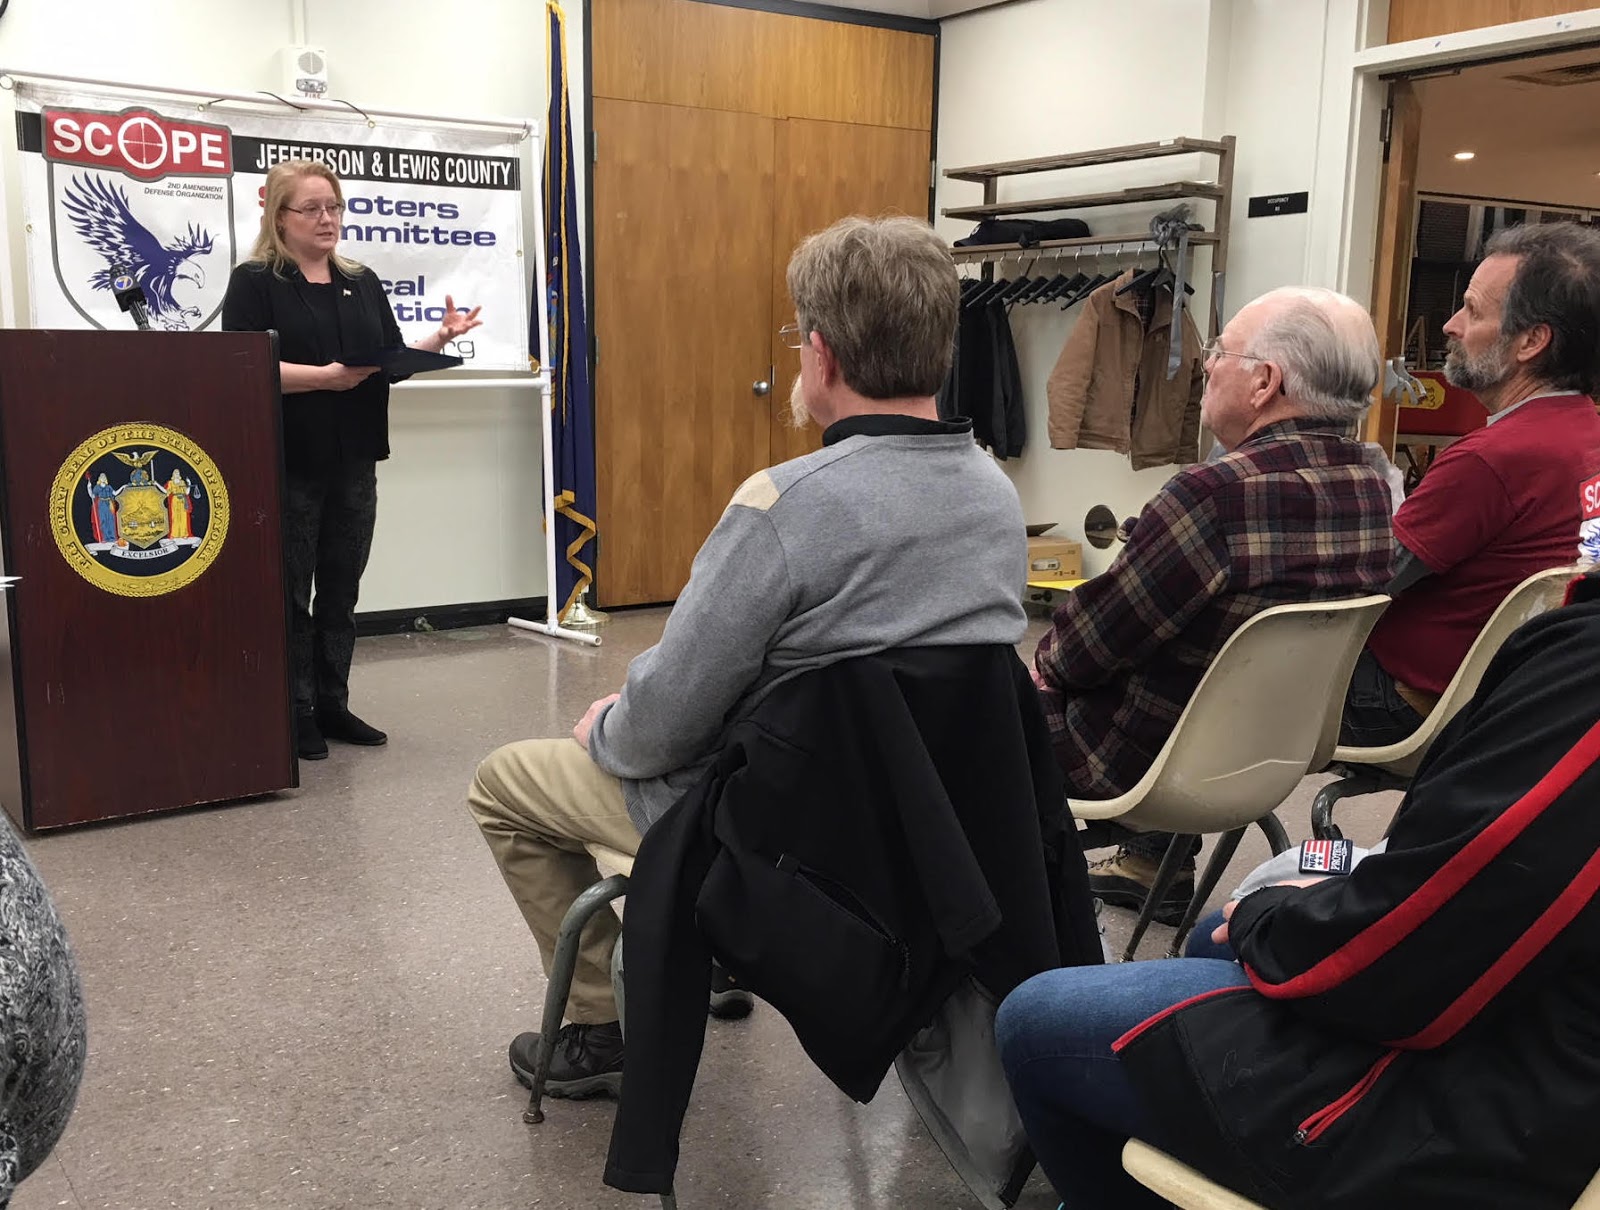 Assemblywoman Addie A.E. Jenne speaks Friday night at the awards ceremony for an essay contest sponsored by the Jefferson-Lewis Counties chapter of SCOPE